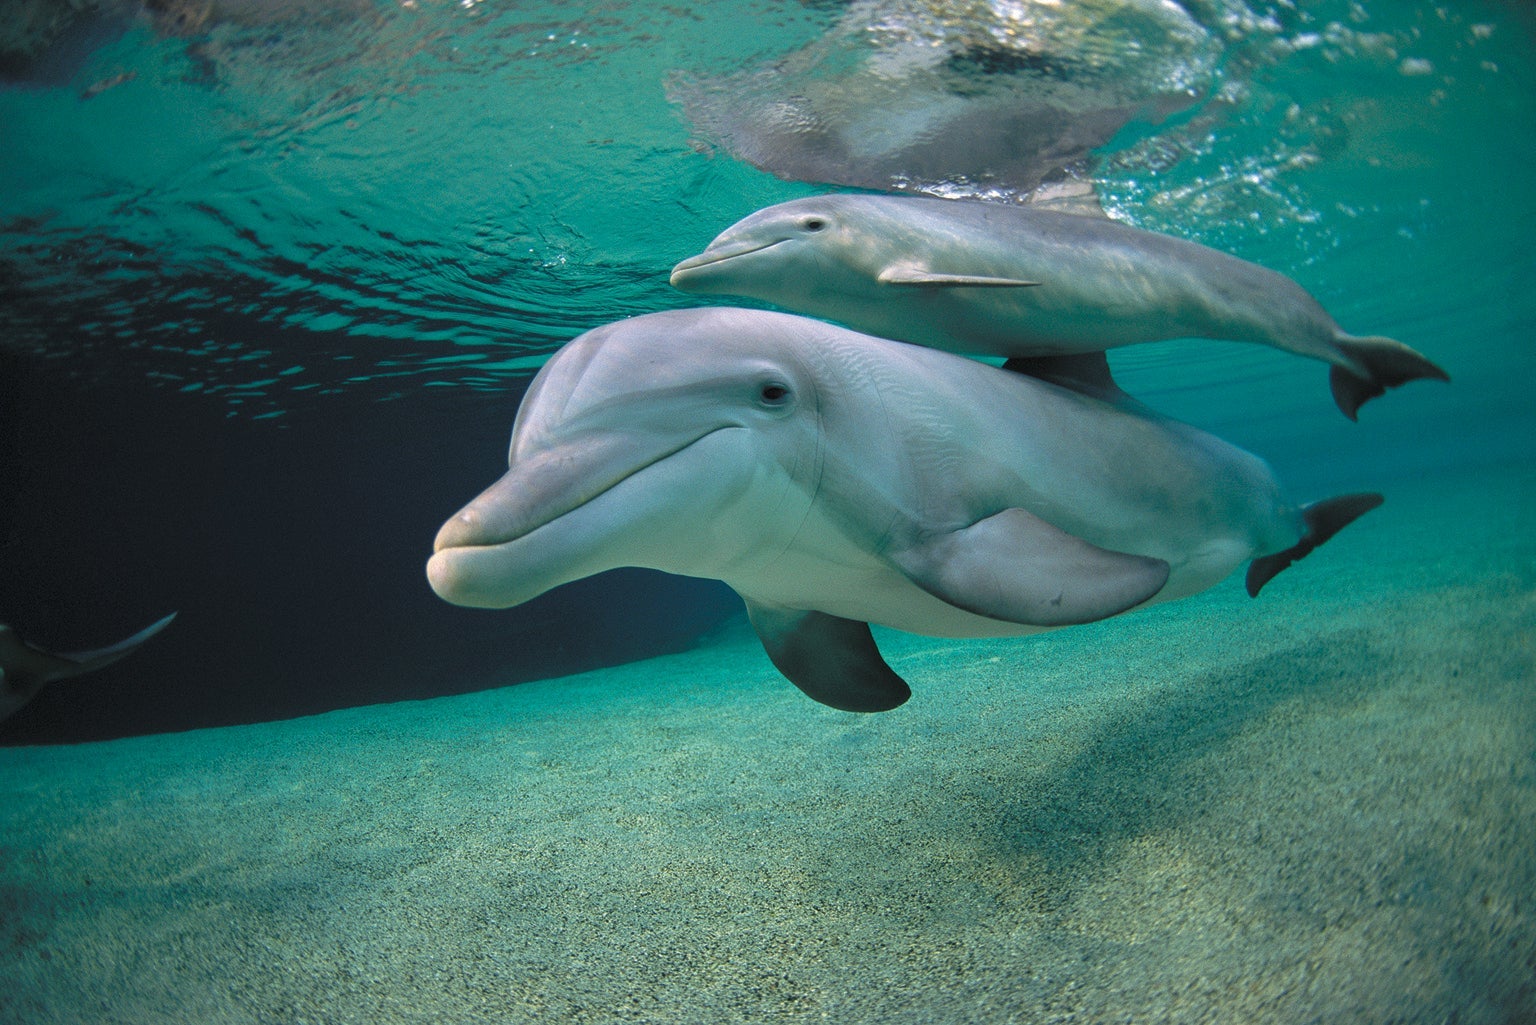 Dolphins Whistle Their Names with Complicated, Expressive Patterns